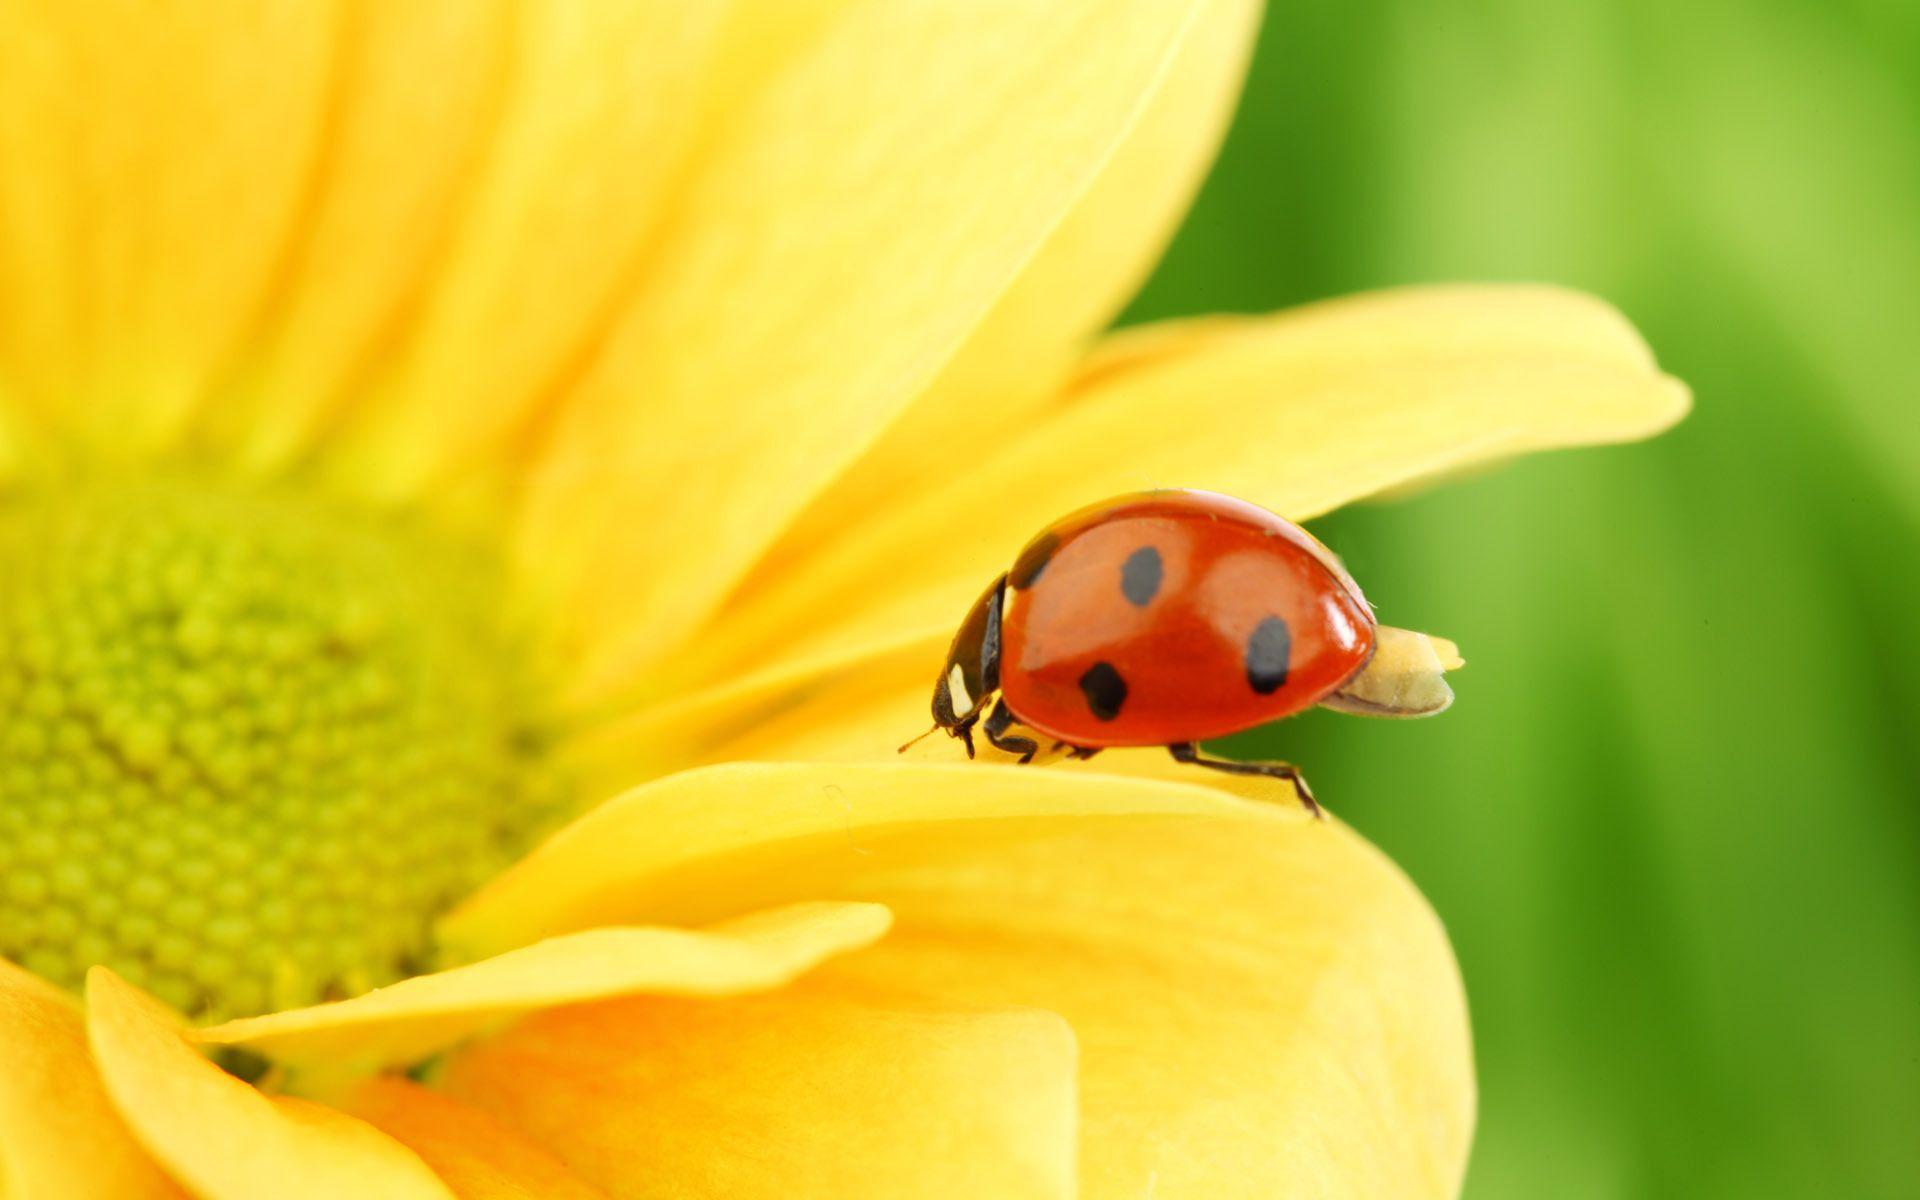 Ladybird on flower wallpaper and image, picture